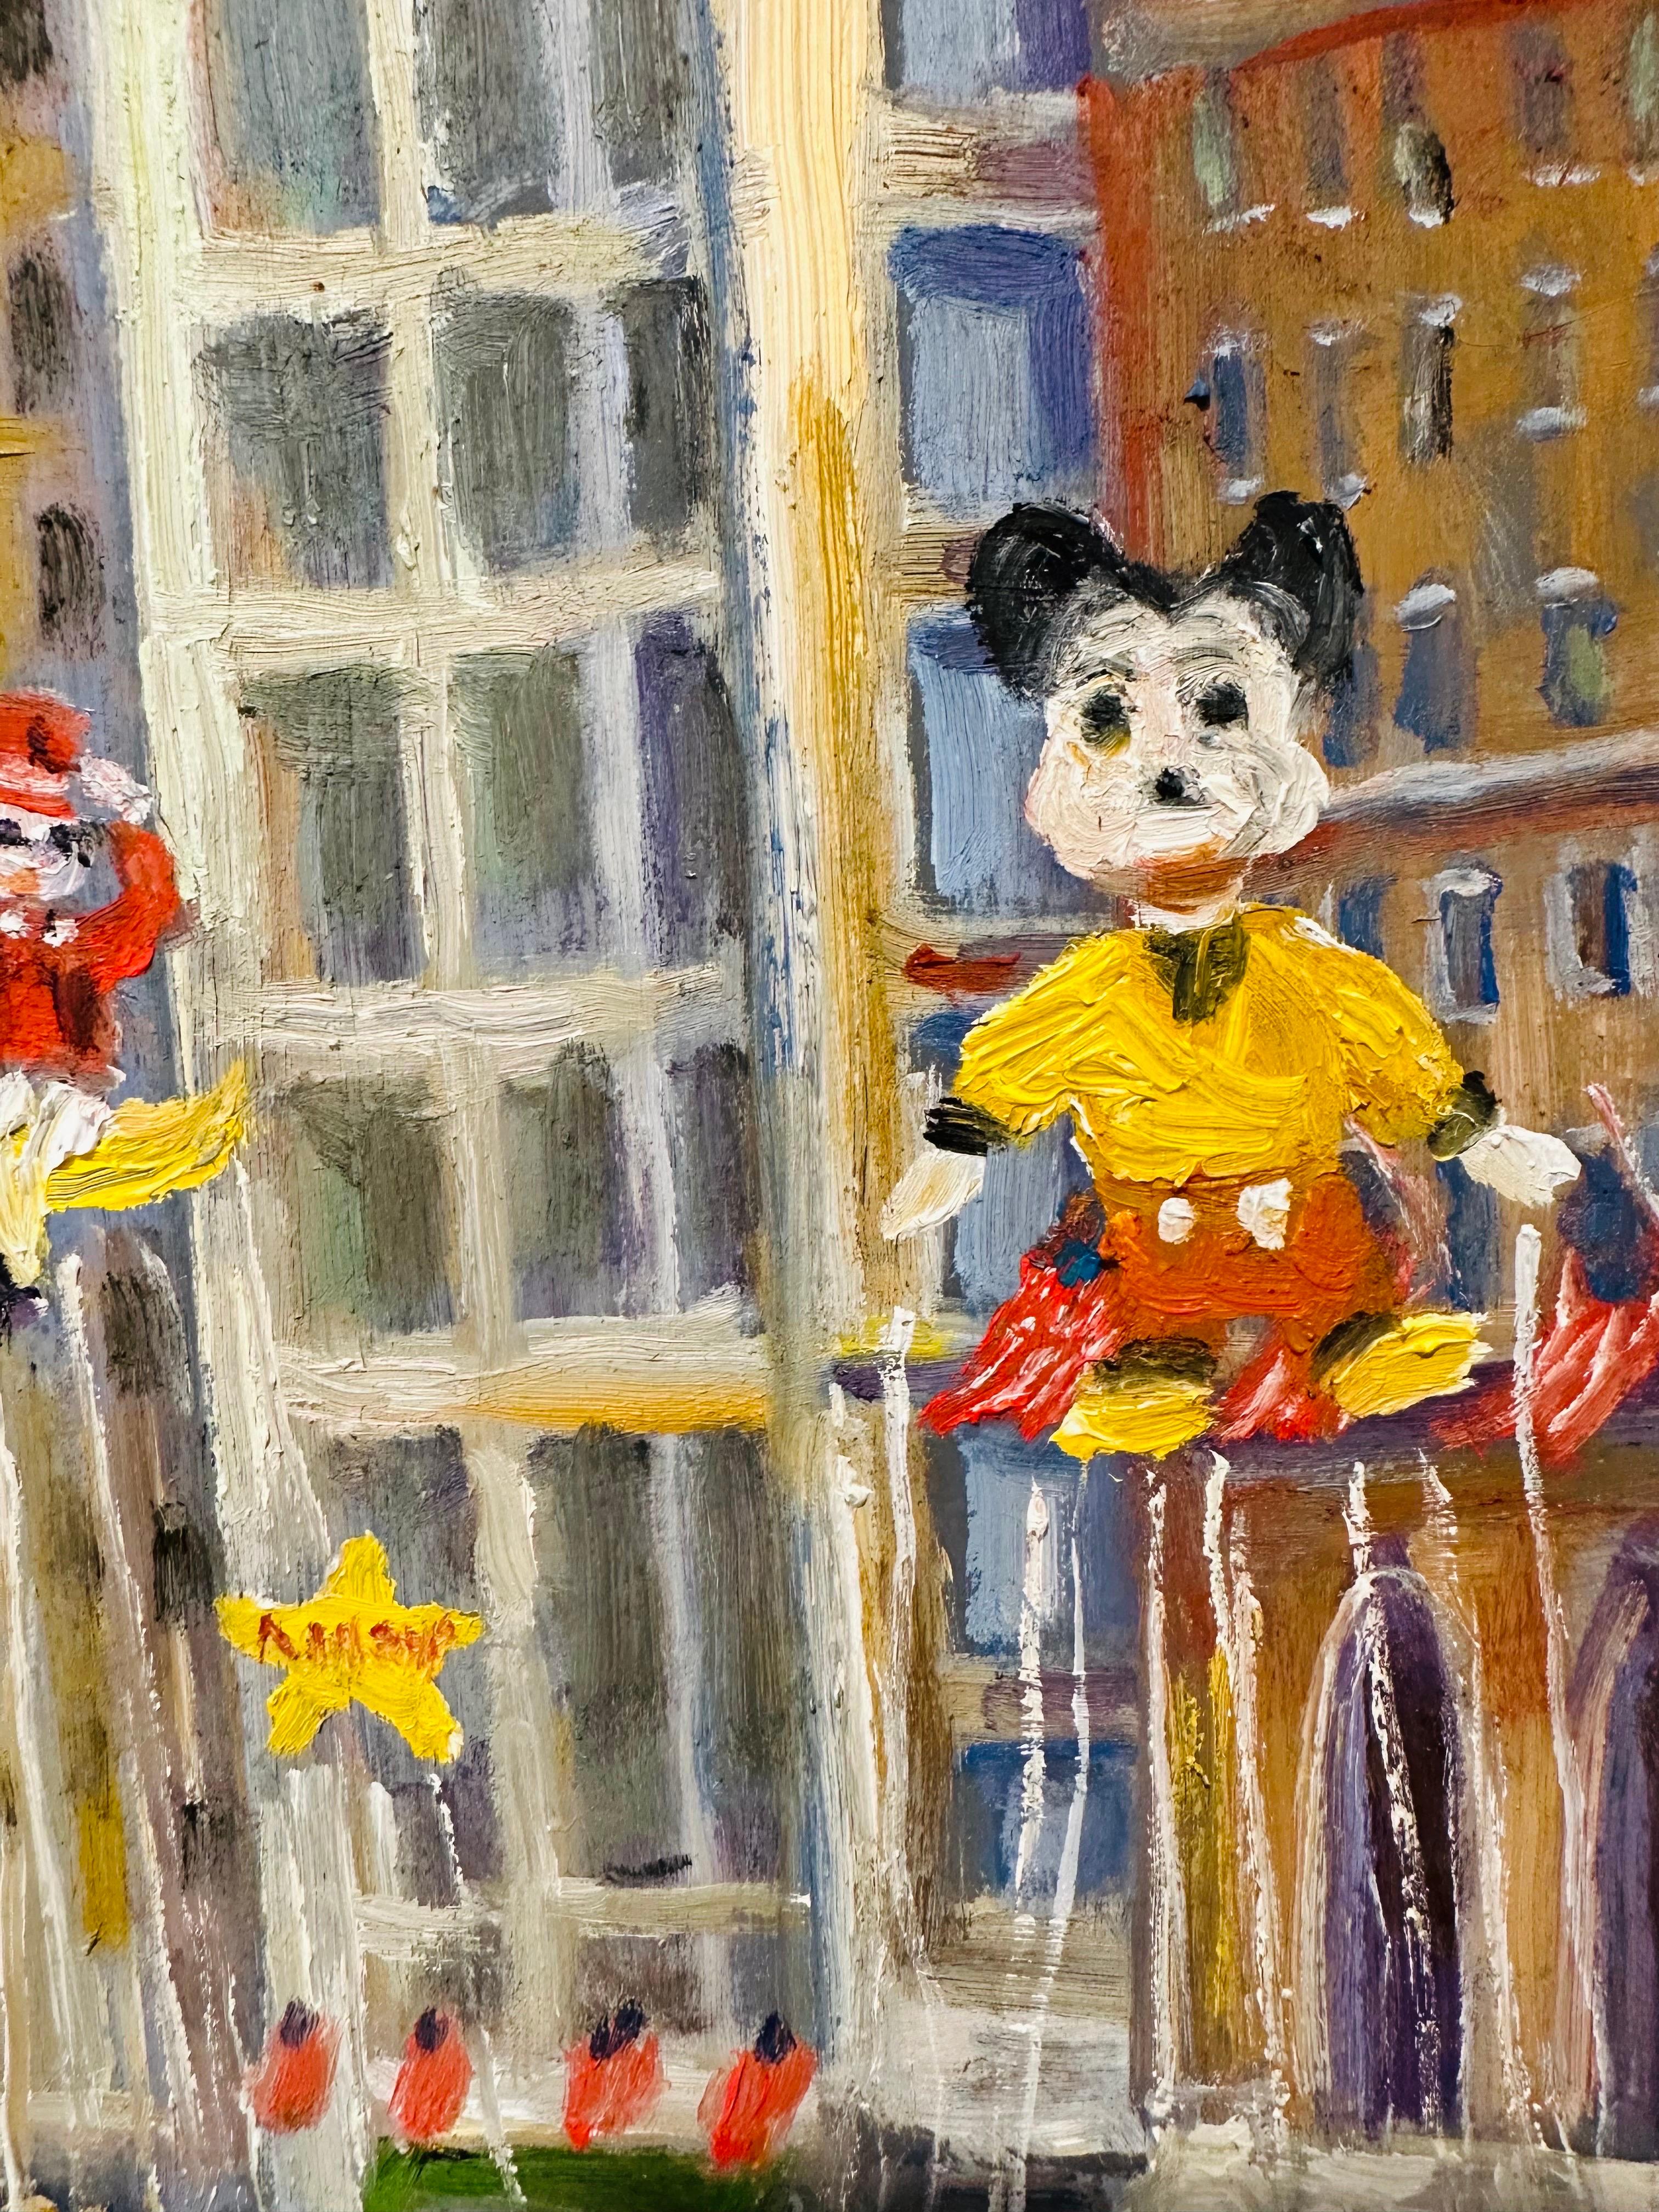 Impressionist New York City Macy's Thanksgiving Day Parade scene depicting Mickey Mouse and other famous friends in a cheerful and energetic way. Holiday goers and ballon handler’s fill the streets with anticipation of what's to come. From early